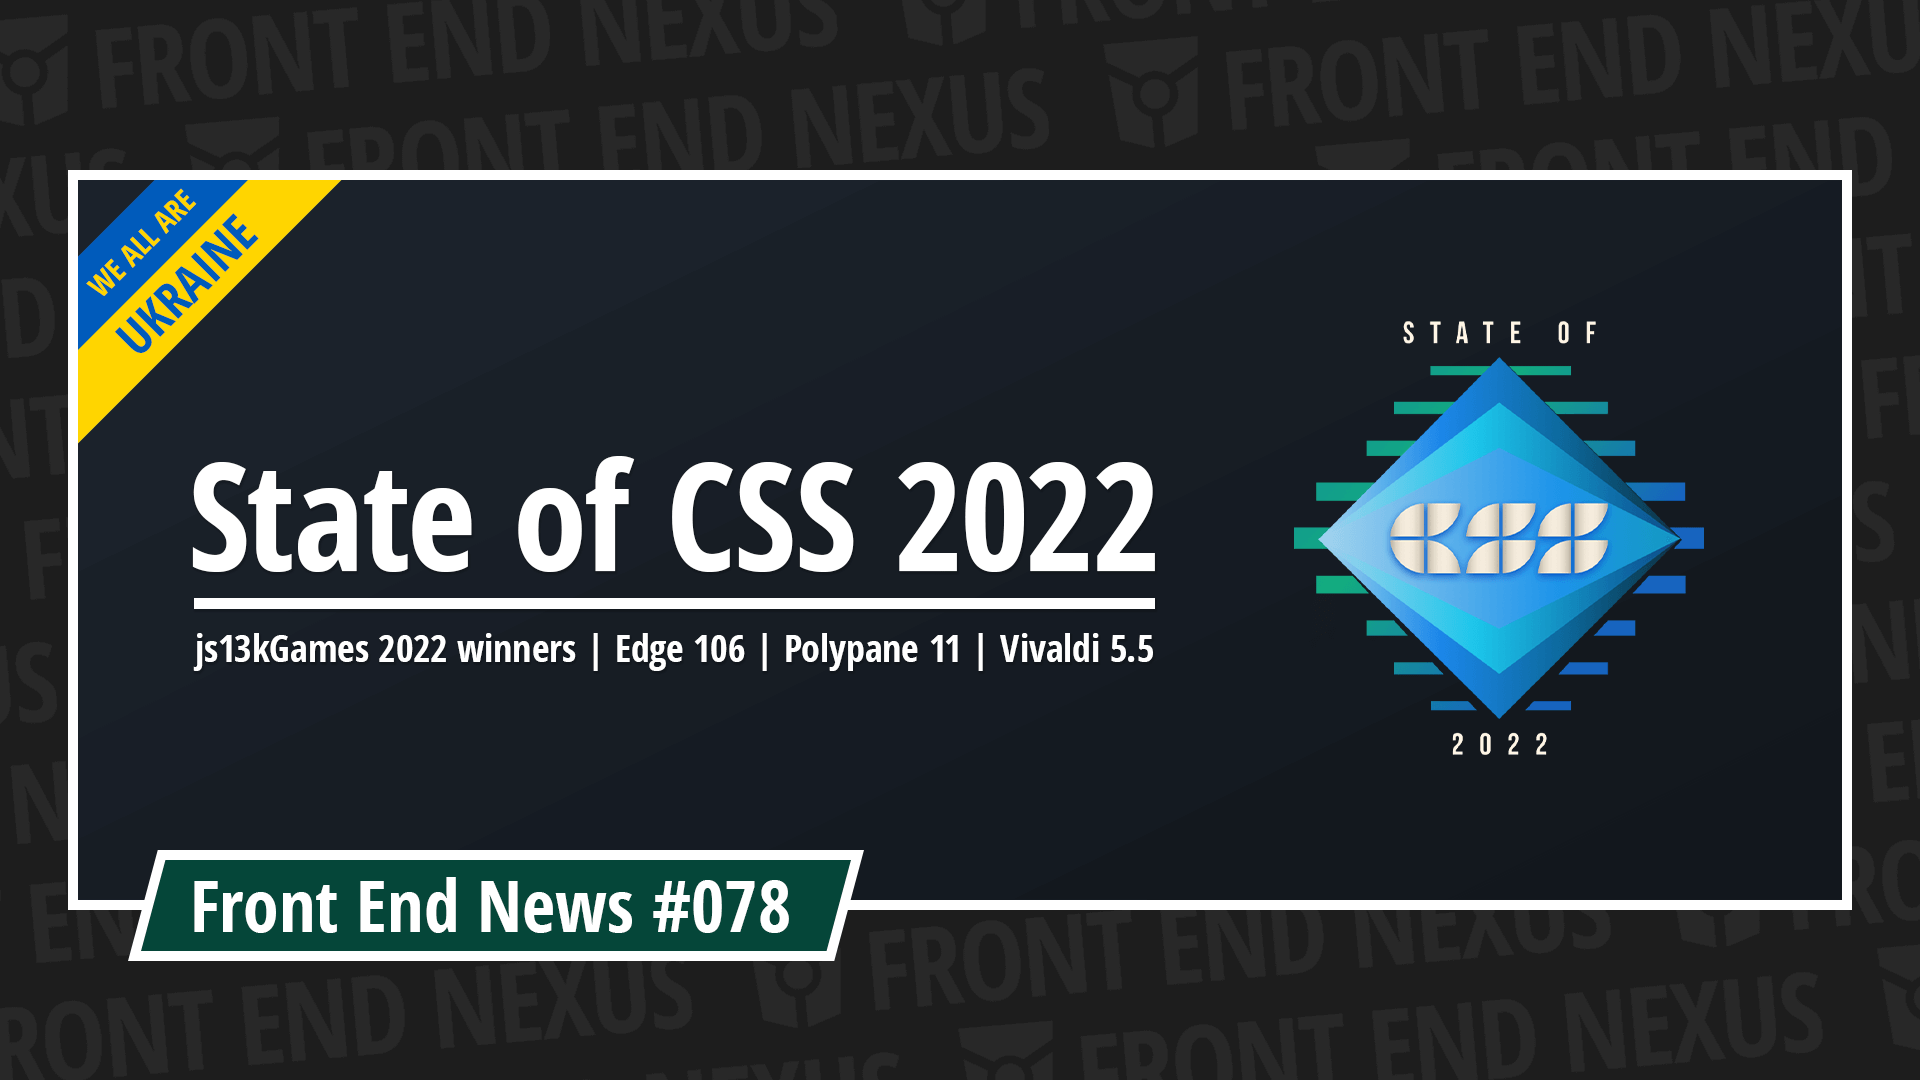 State of CSS 2022, js13kGames 2022 winners, Edge 106, Polypane 11, Vivaldi 5.5, and more | Front End News #078